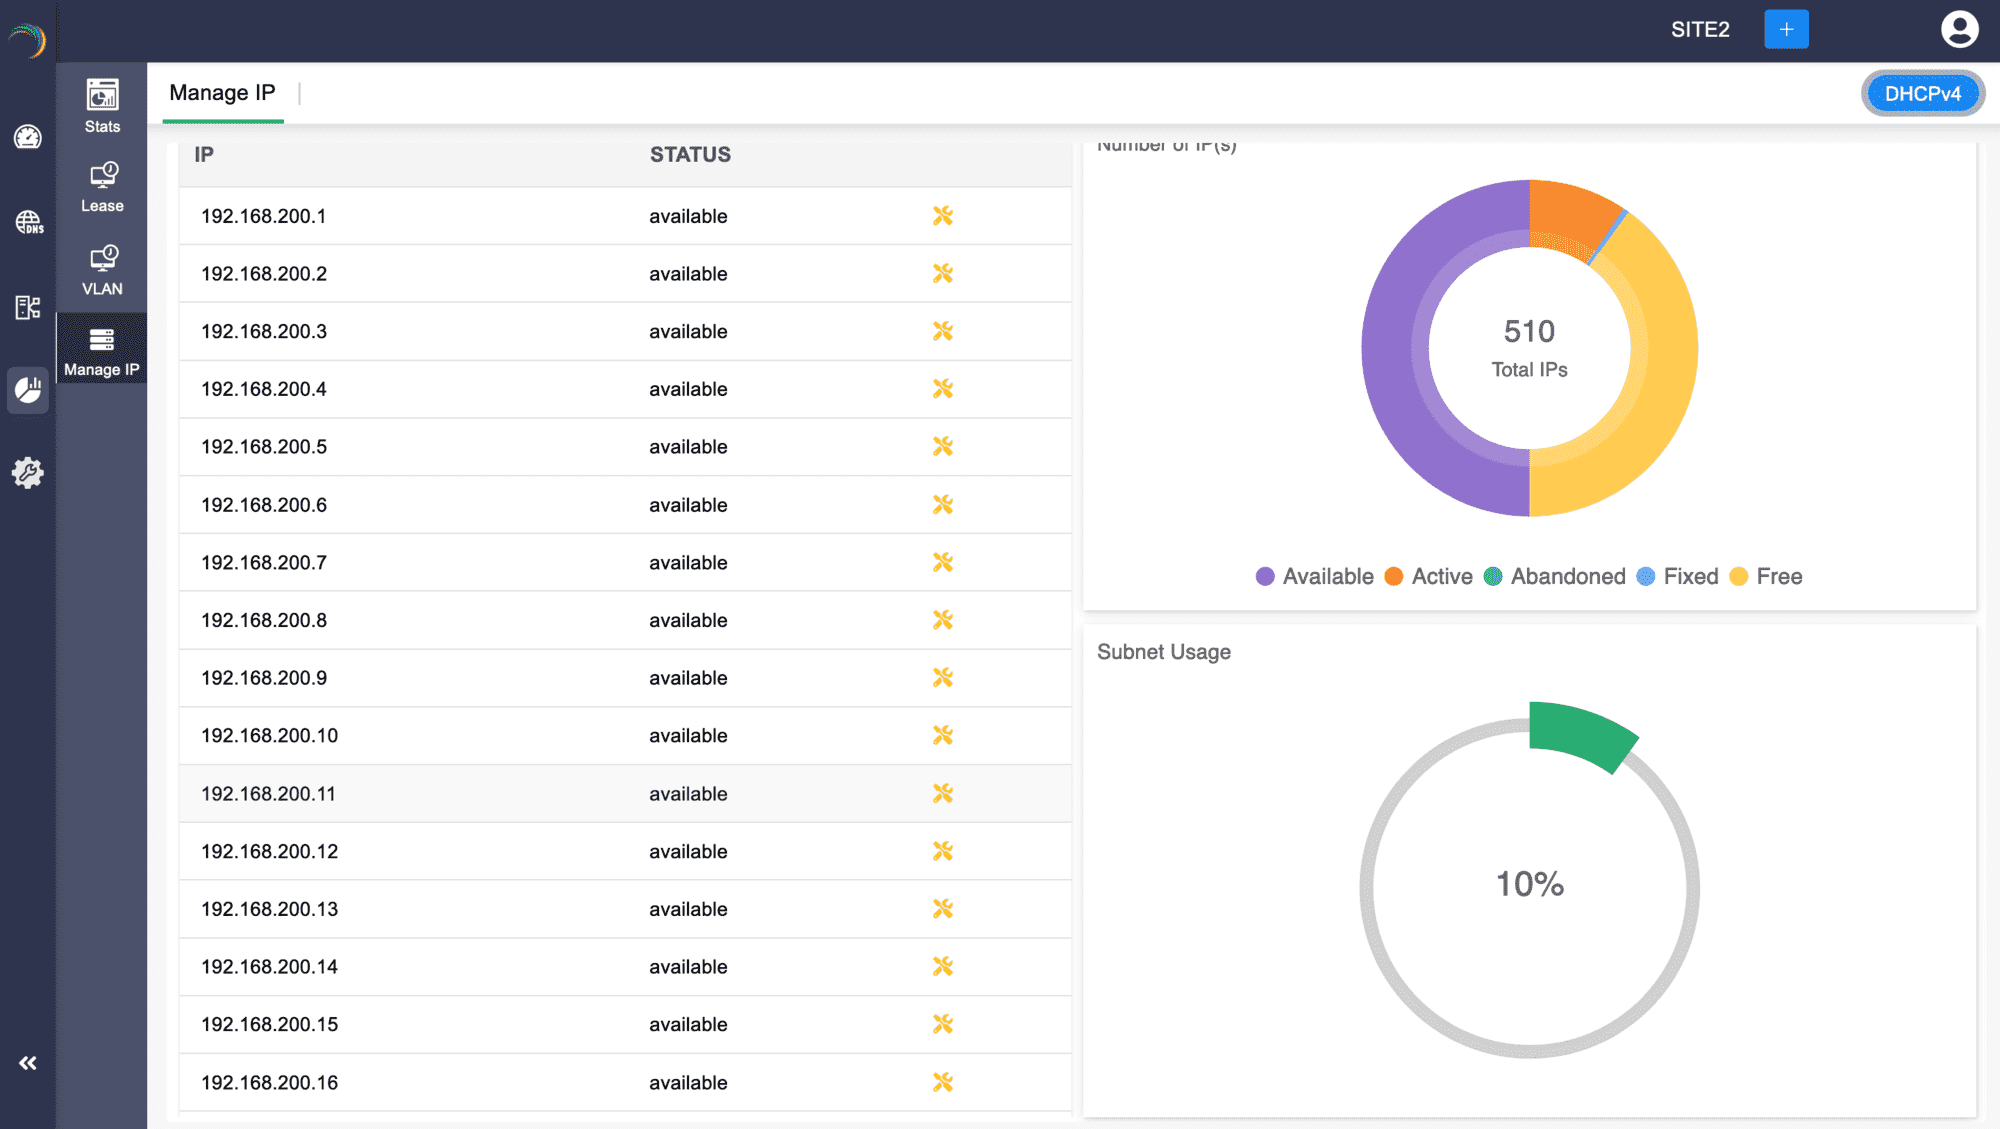 Monitor each scope in your network with visual snapshot of the capacity of each scope. Manage both IPv4 and IPv6 address inventory within a single window. Reserve fixed or static addresses for special hosts and apply standard or customized DHCP options.